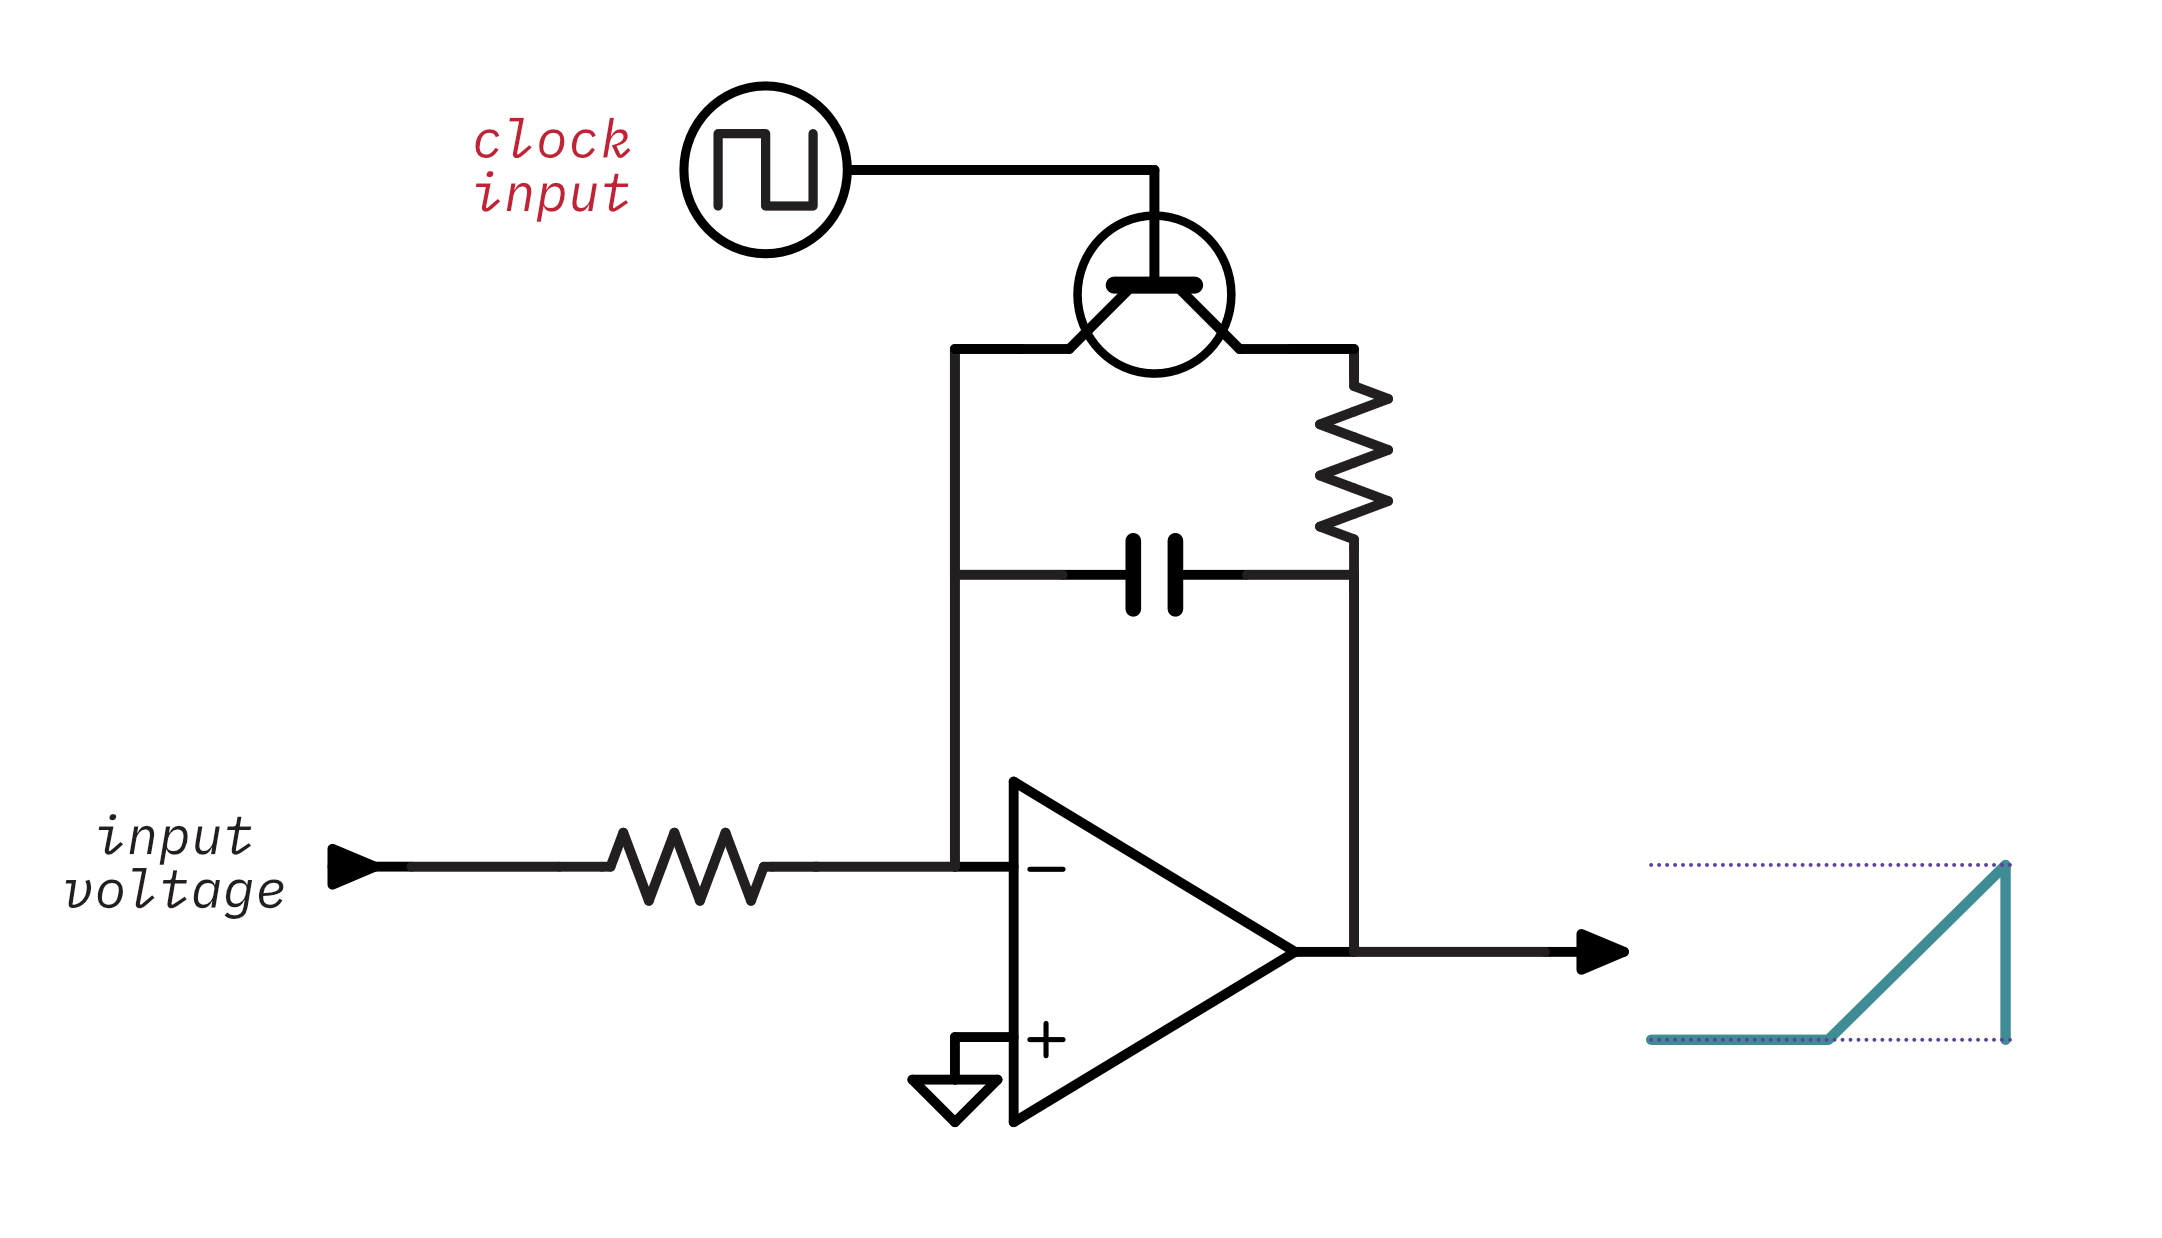 A dco with the clock directly connected, showing an output that's flat for half of the time